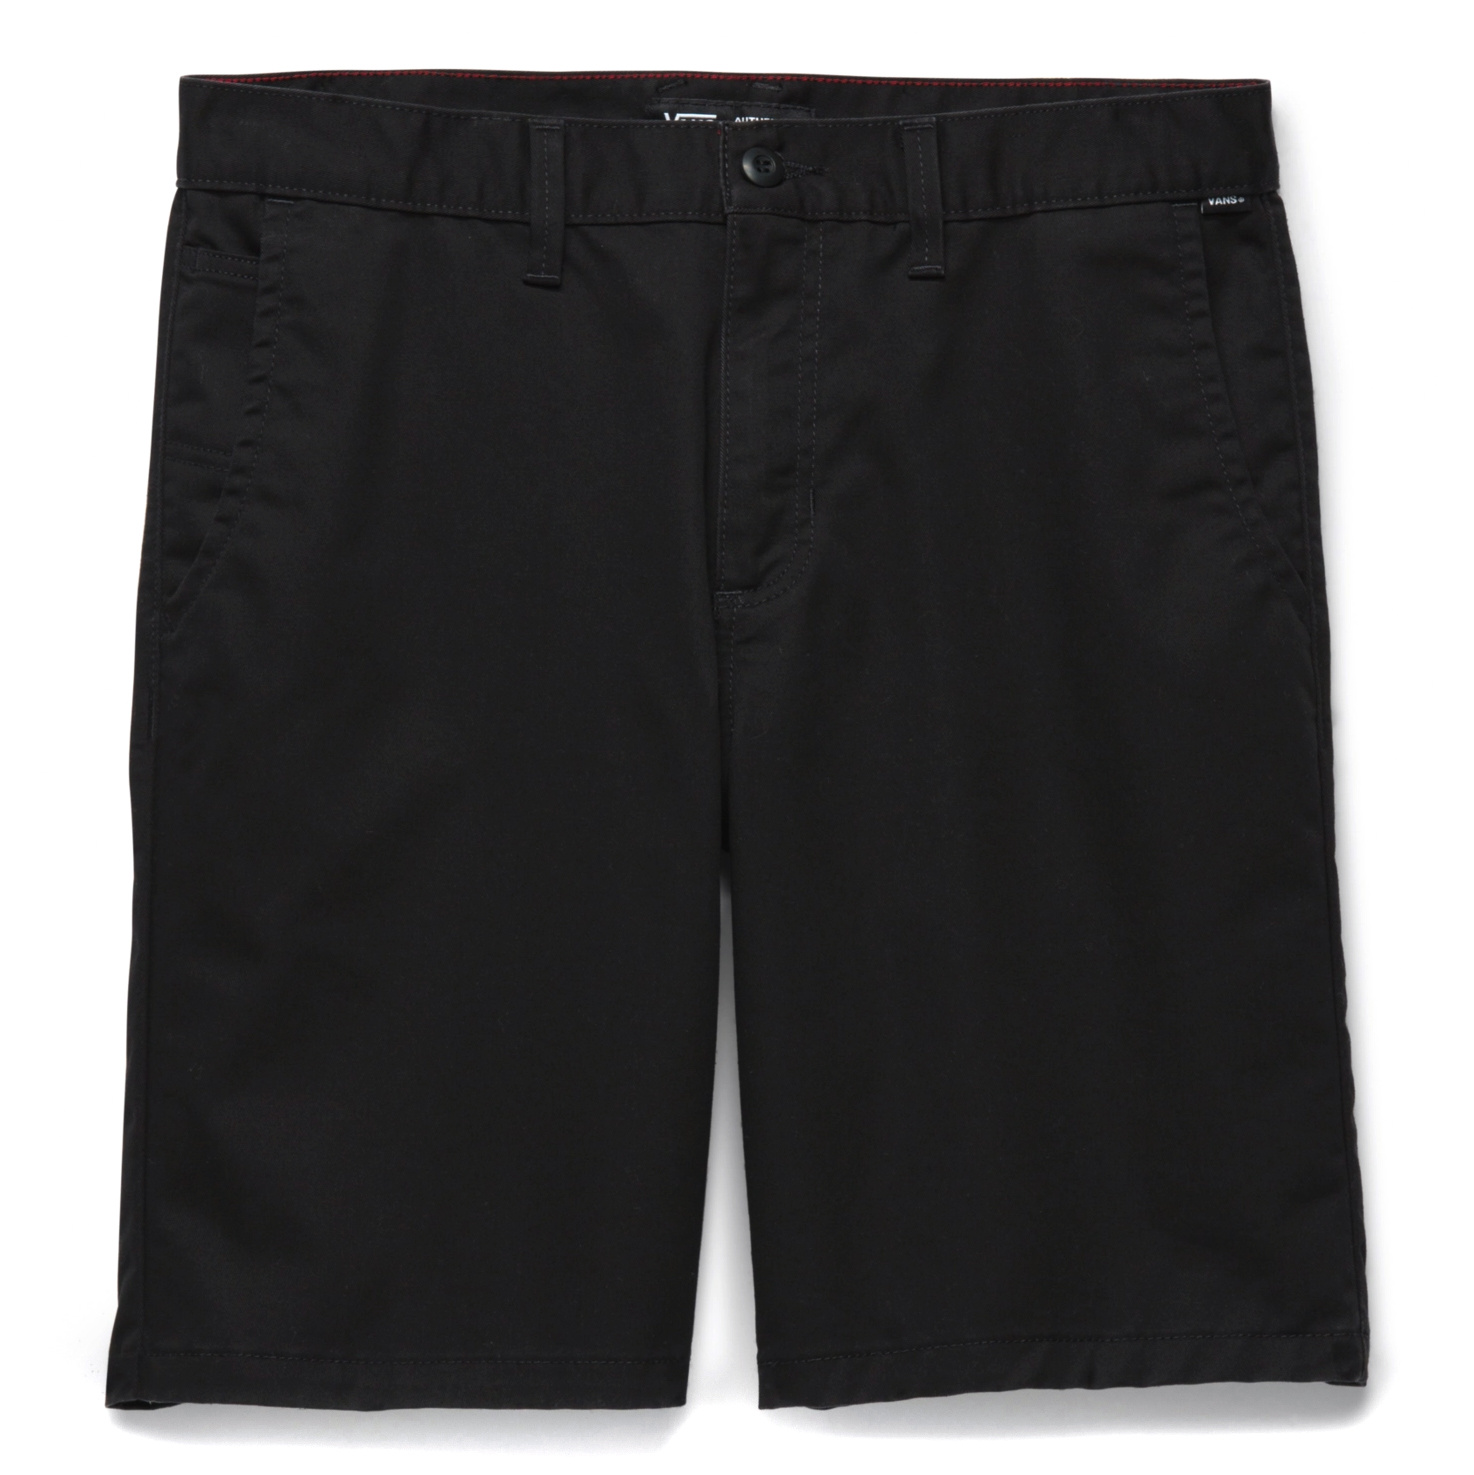 Vans Authentic Chino Relaxed Shorts - Black - MODA3